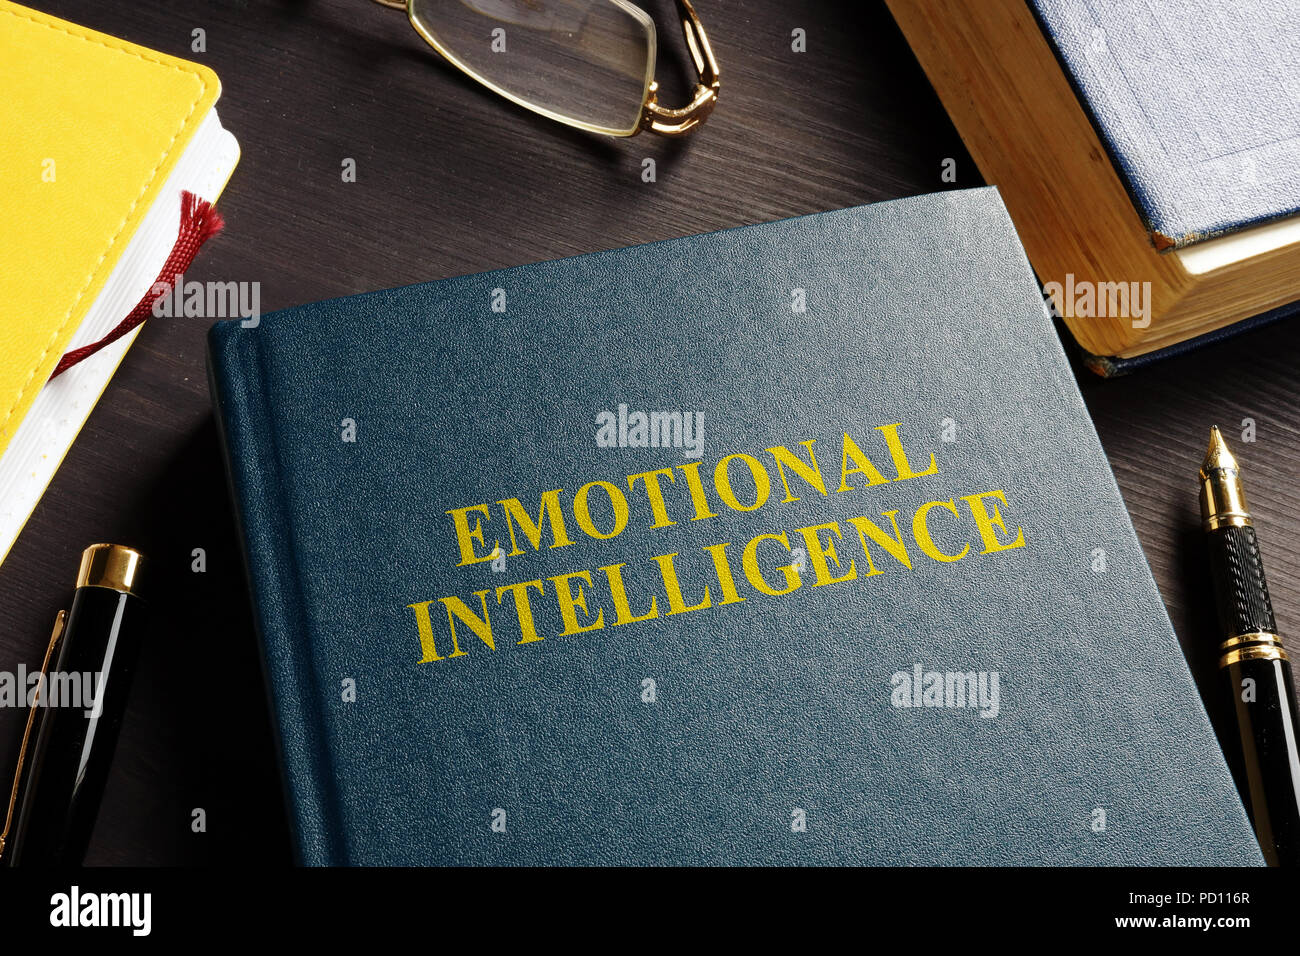 Book about Emotional intelligence EI on a desk. Stock Photo